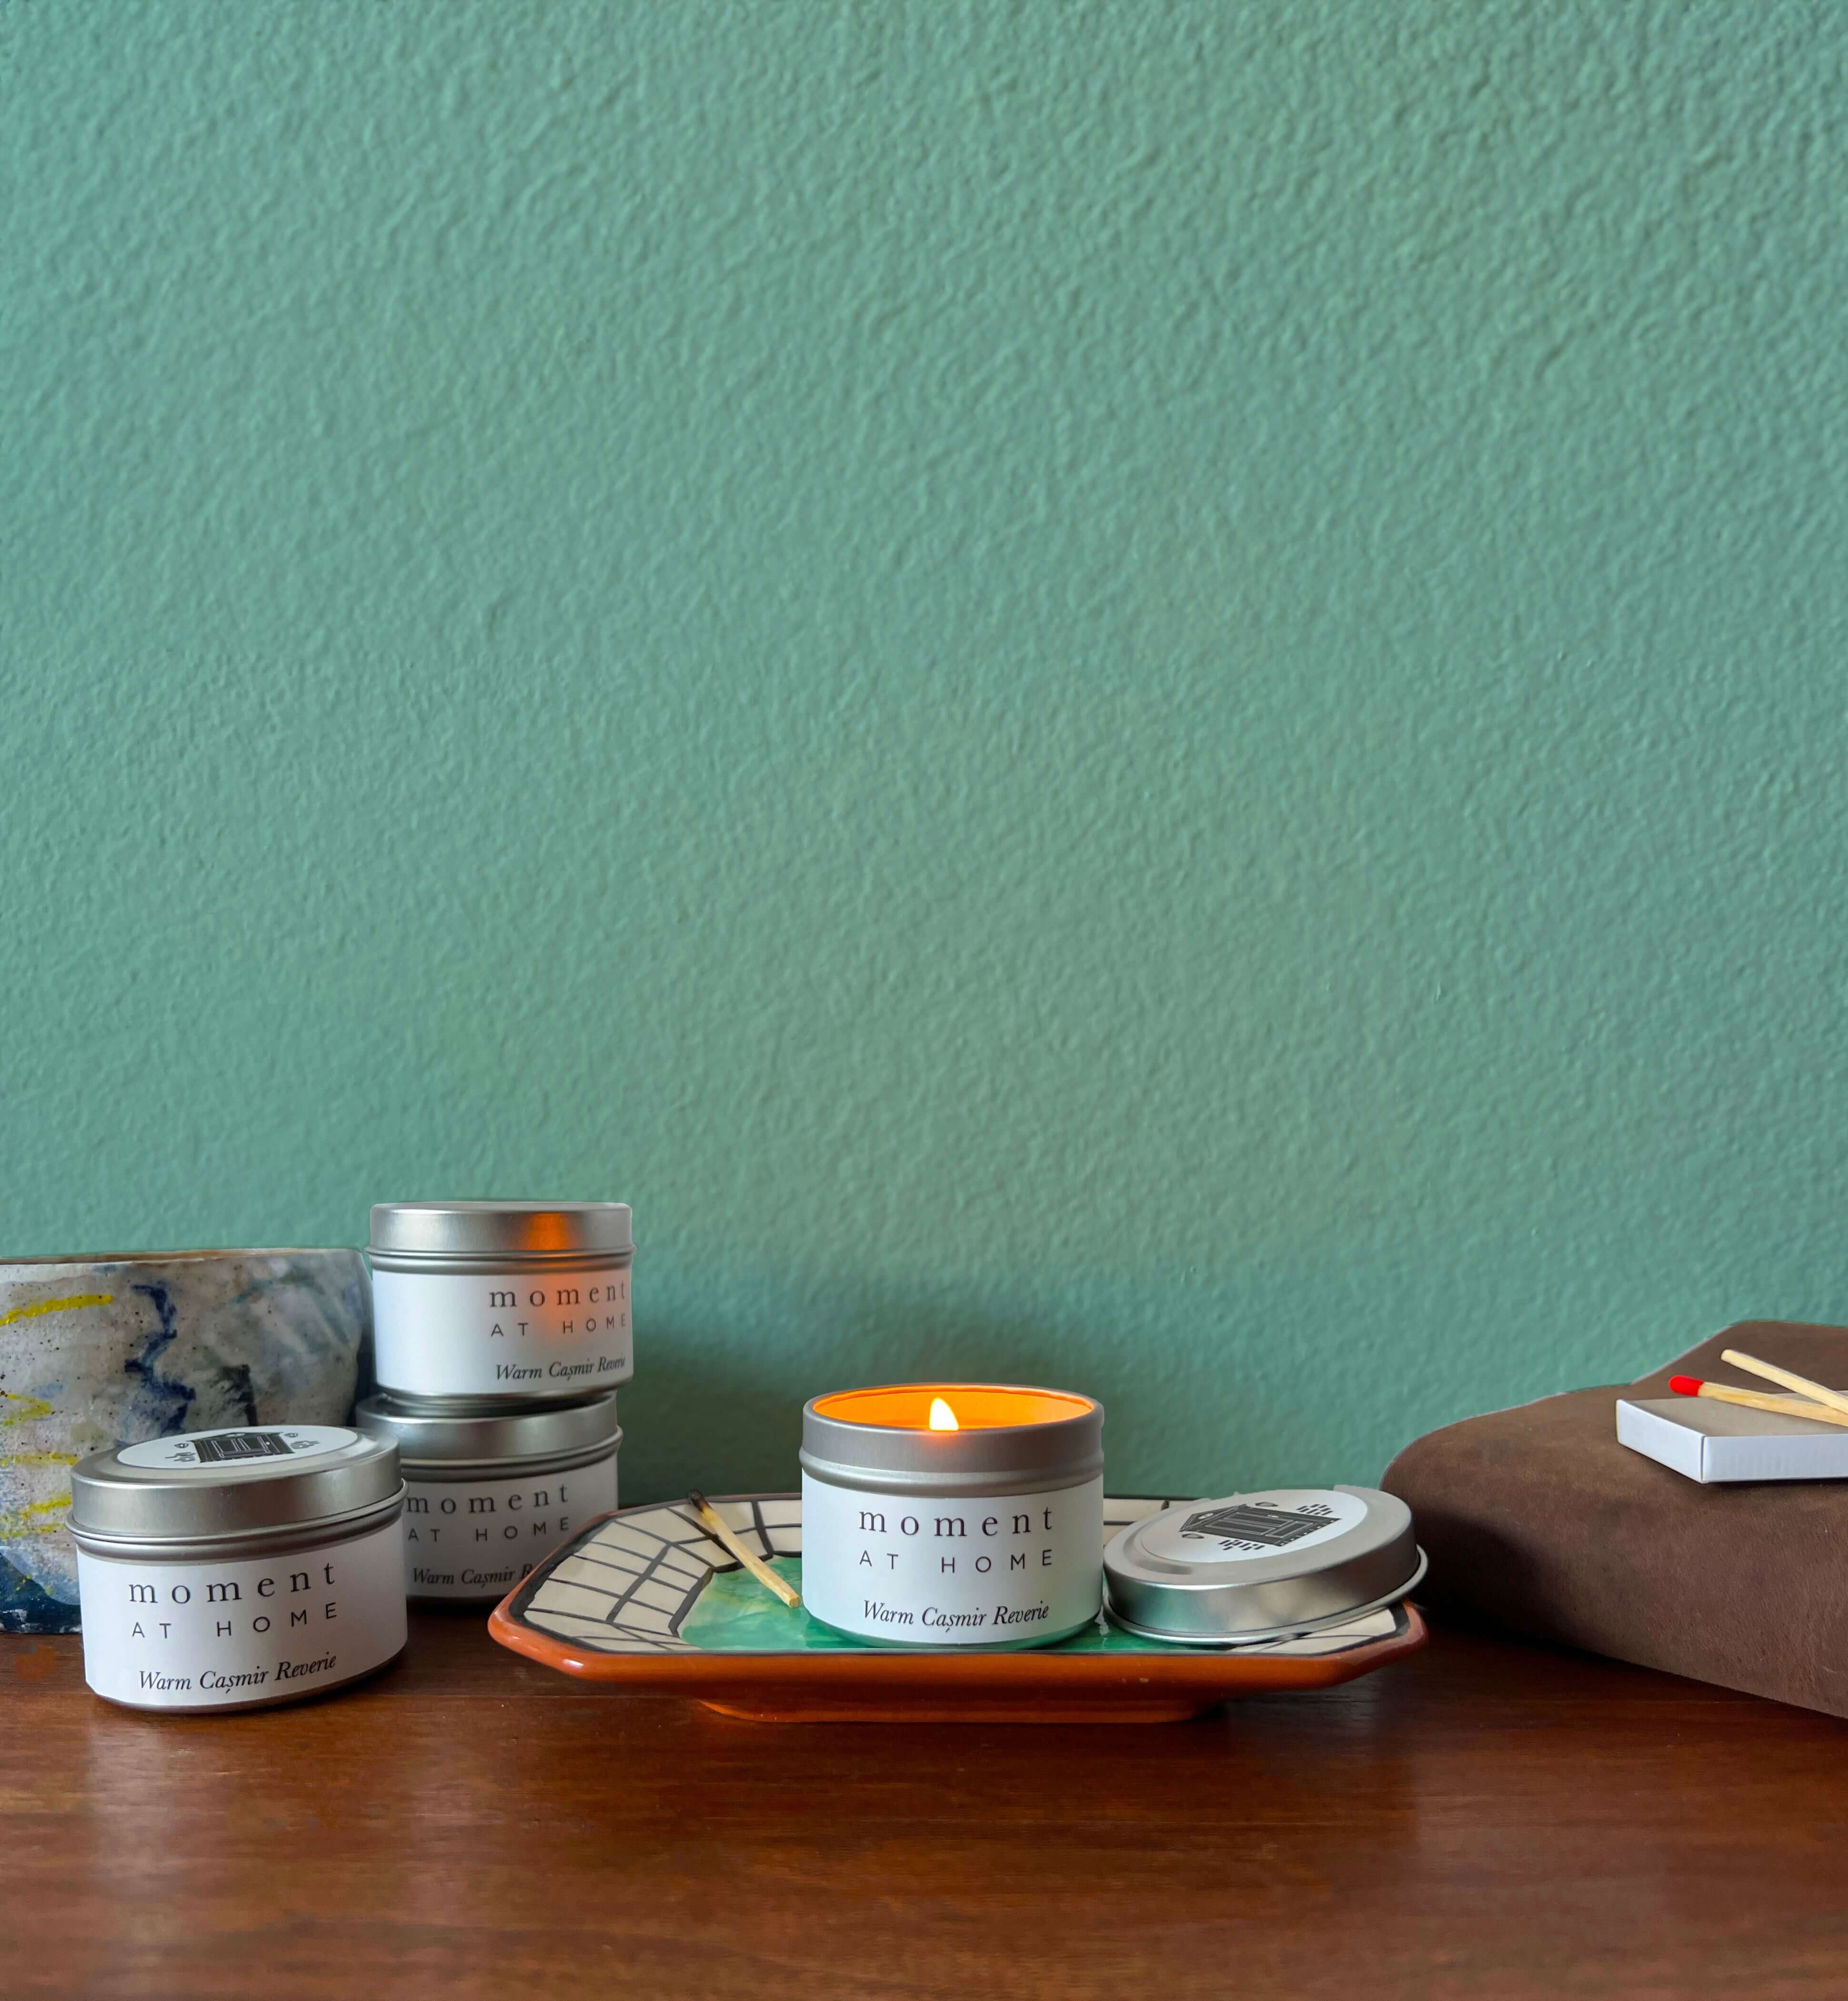 Moment At Home scented travel candles.